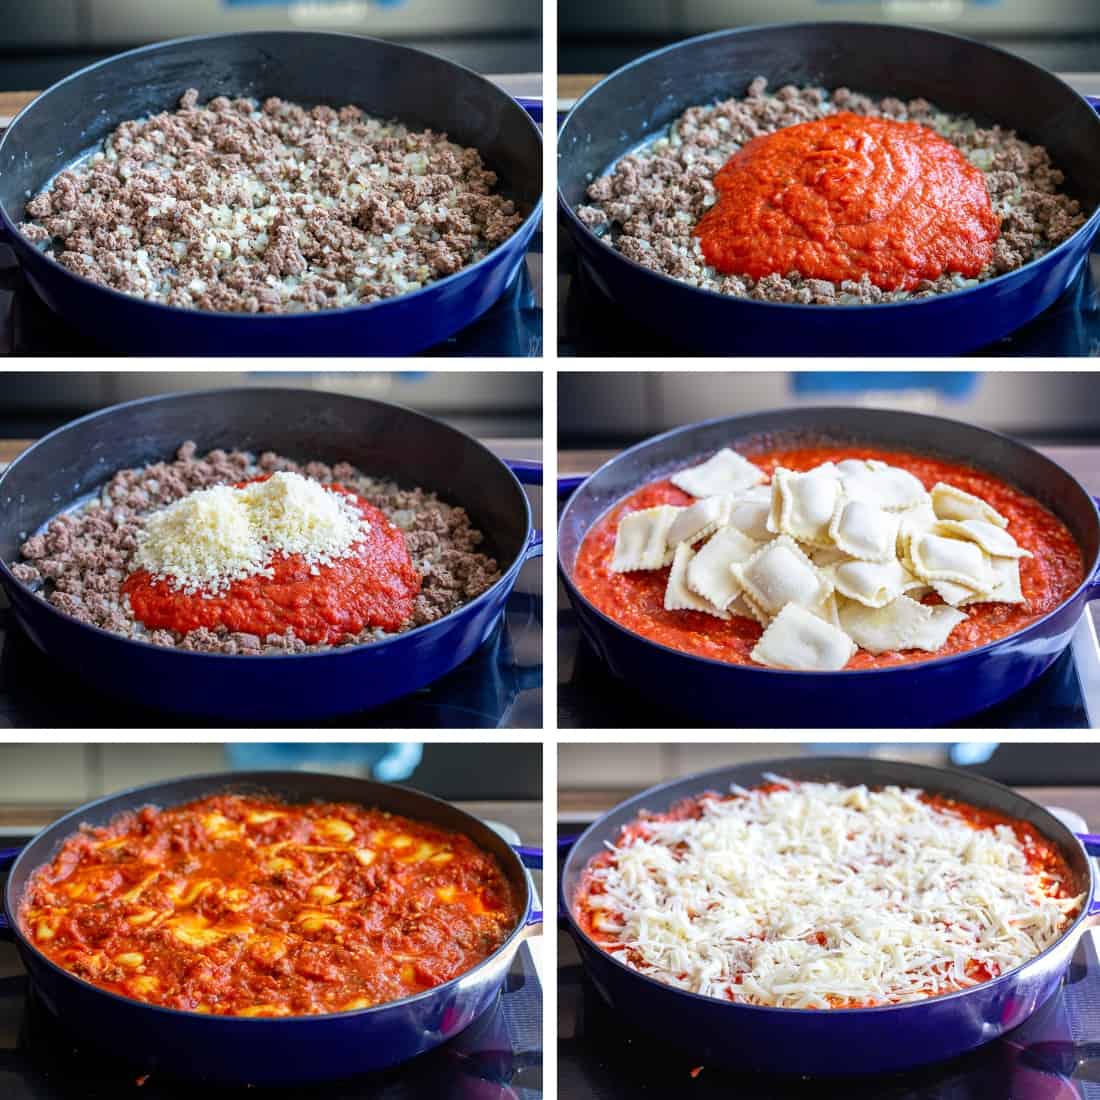 Steps for adding meat, sauce, cheese, ravioli, and more cheese to a skillet to make Skillet Ravioli.